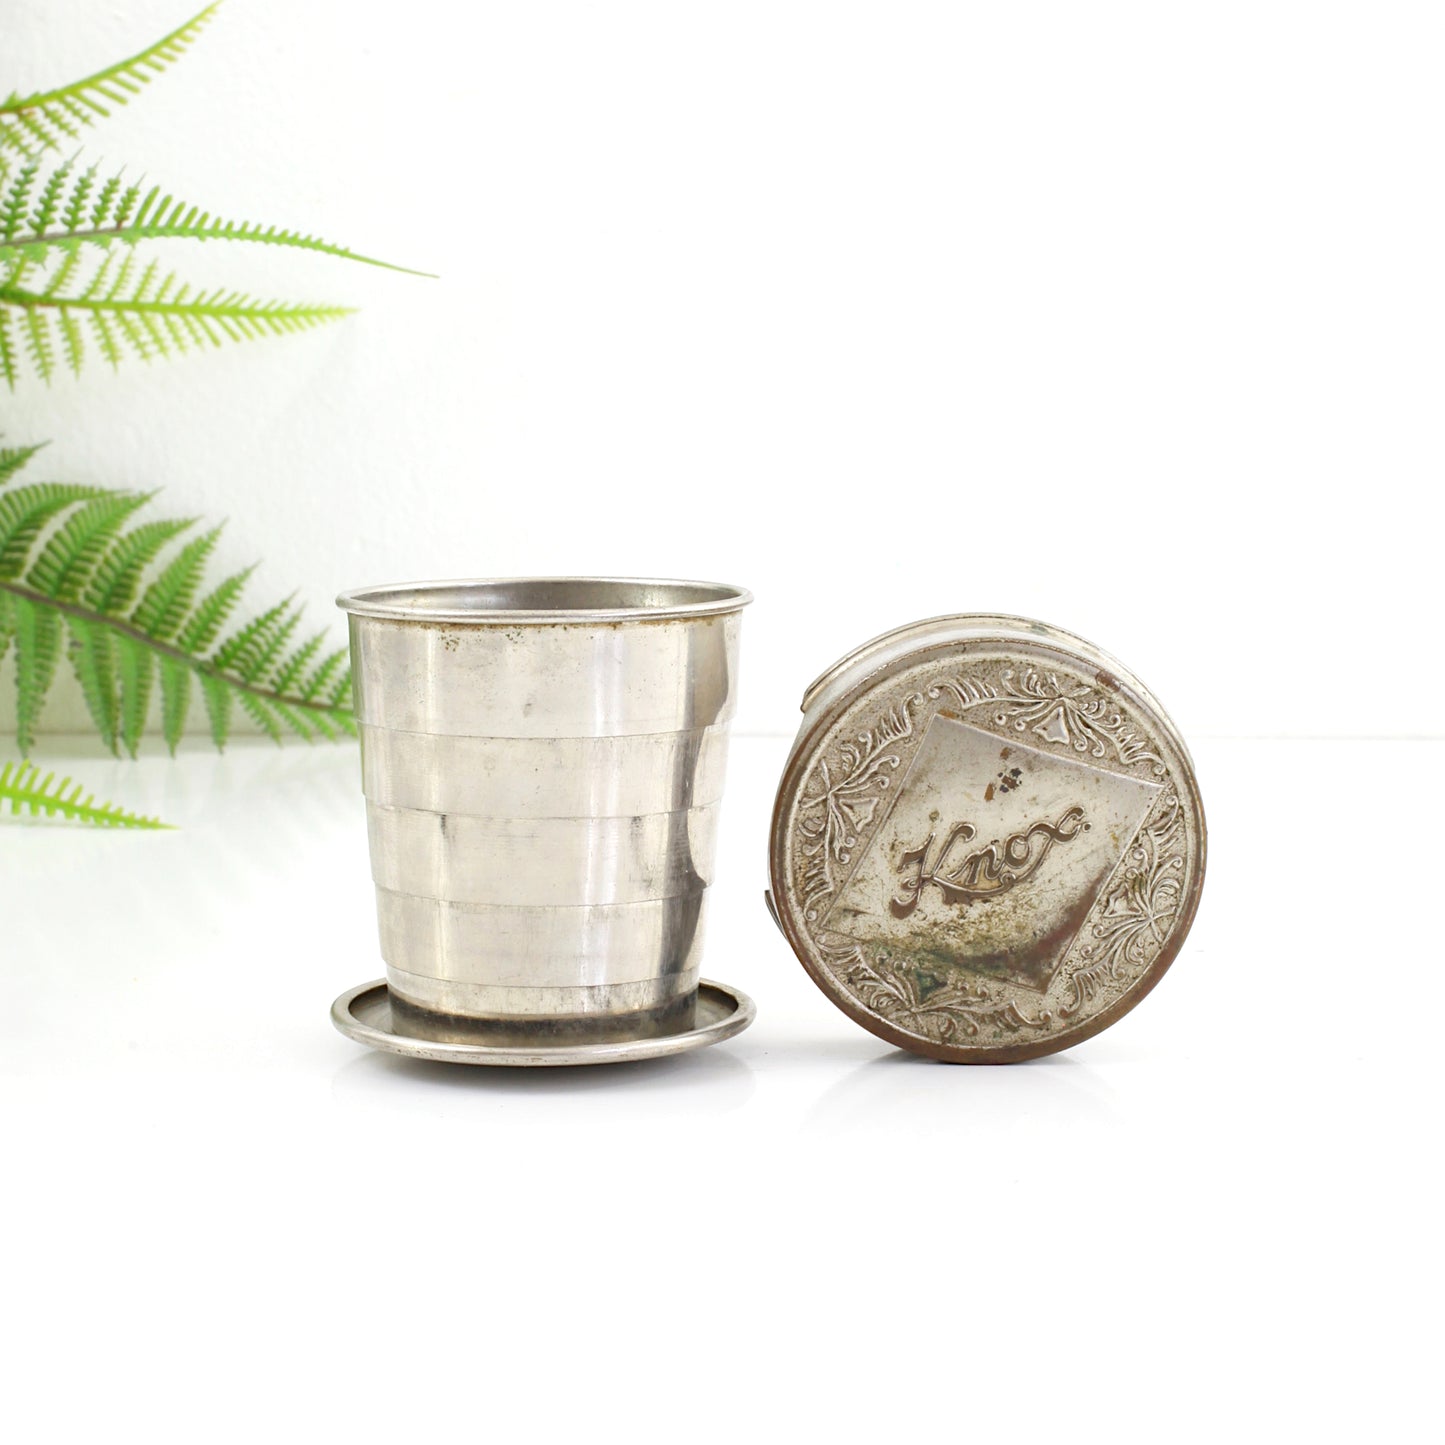 SOLD - Antique Knox Silver Collapsible Travel Cup